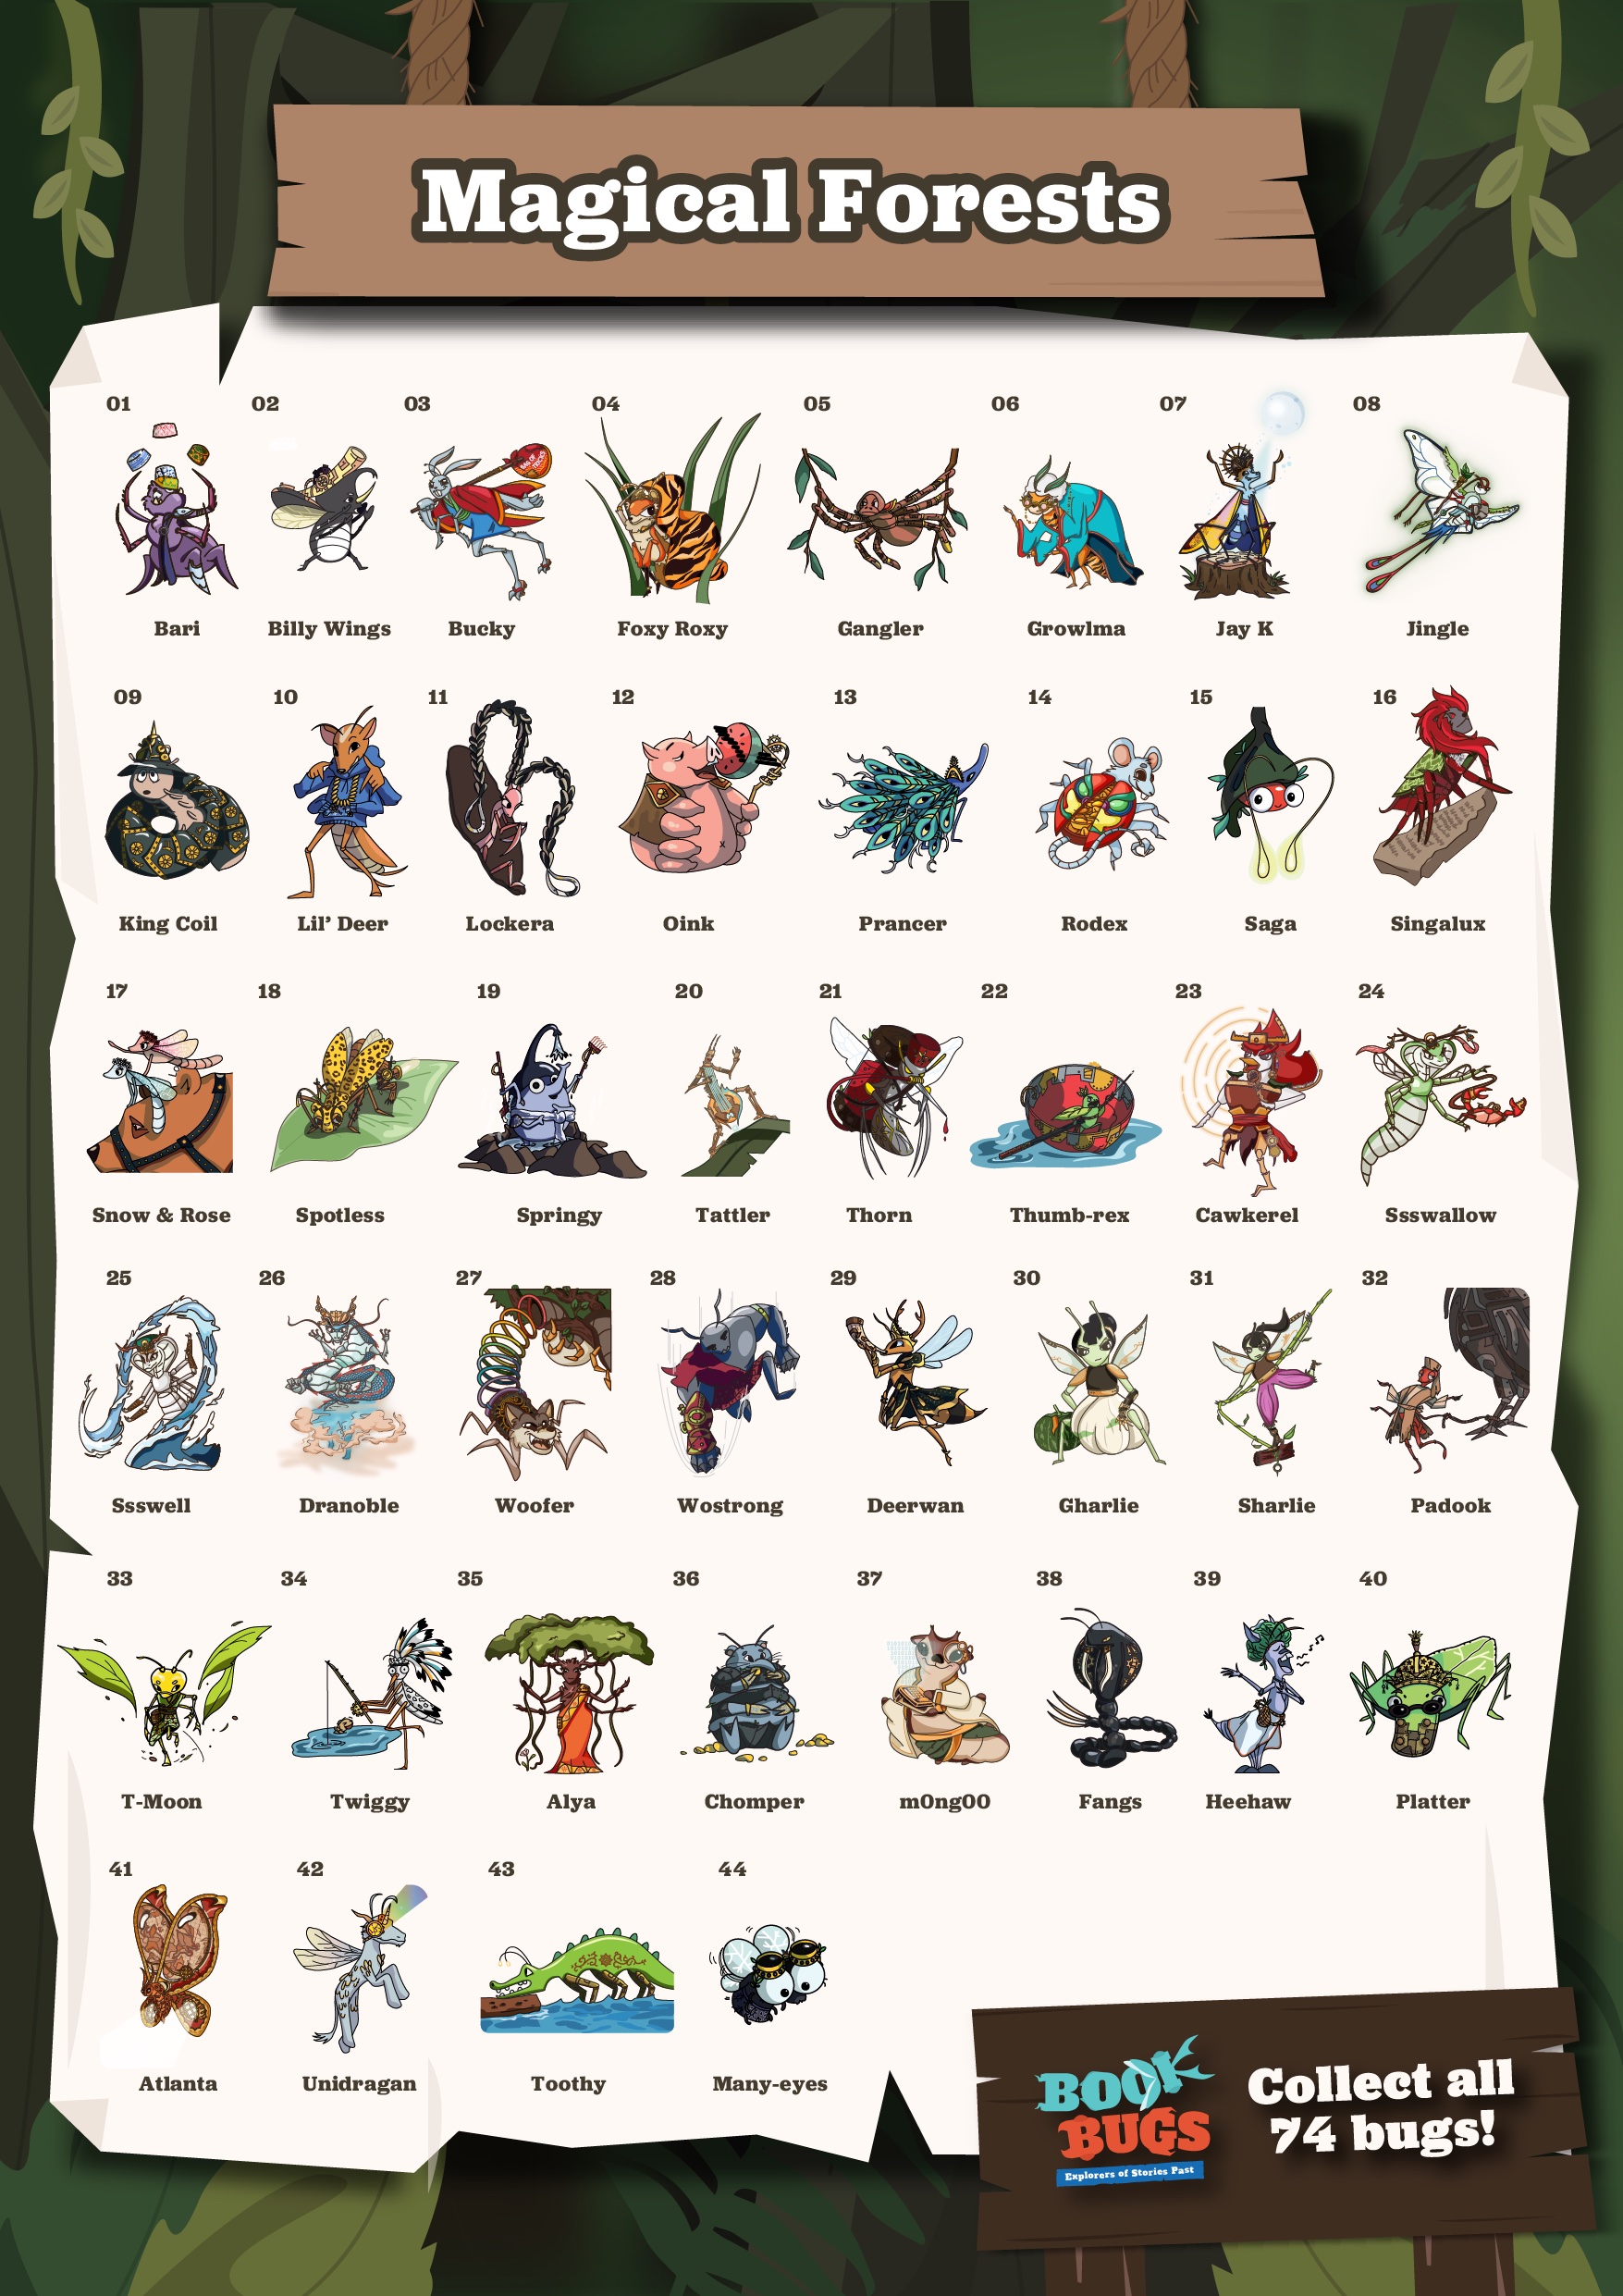 List of Magical Forests Bugs